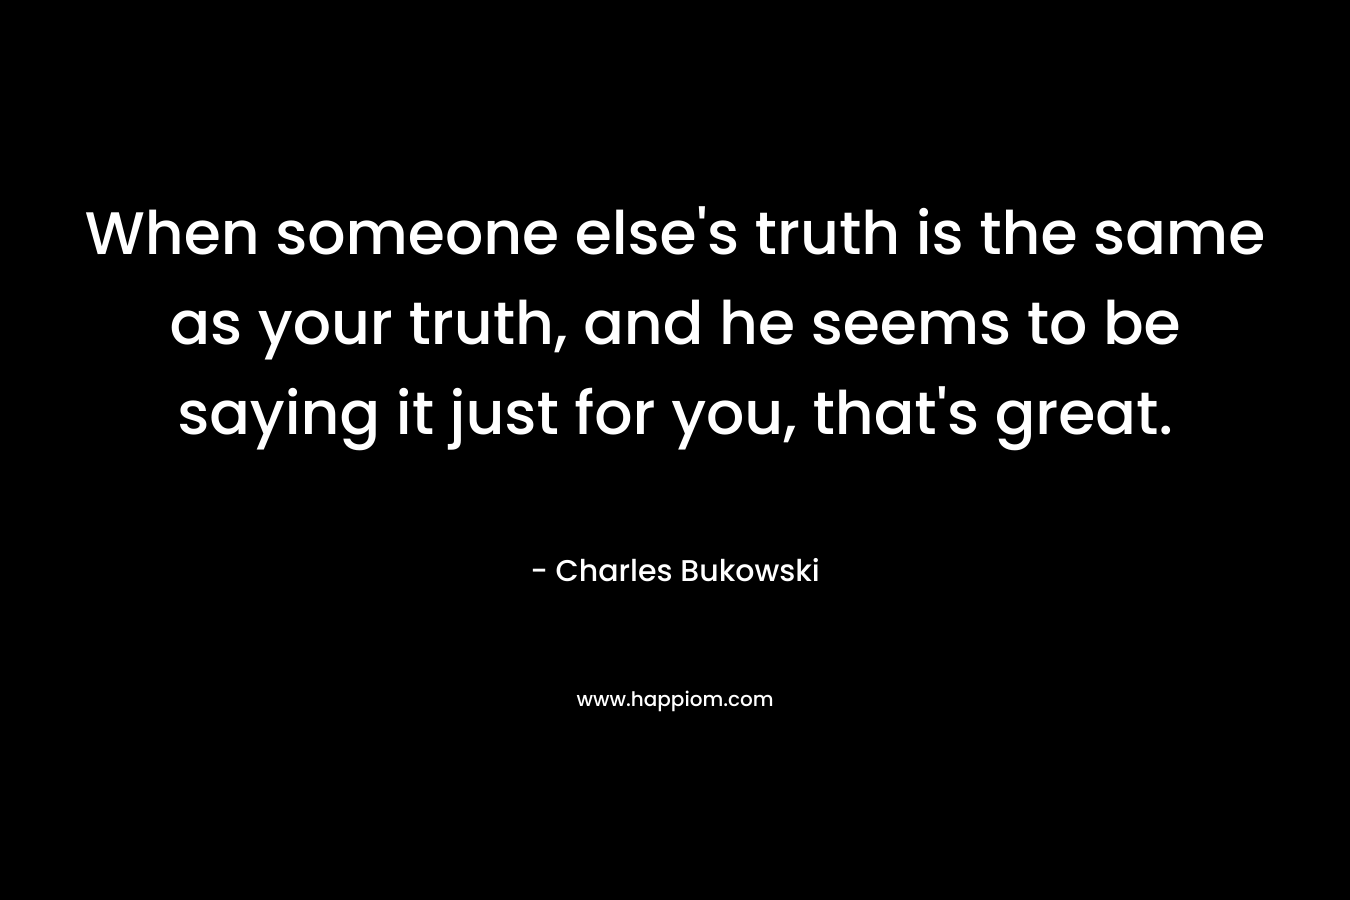 When someone else's truth is the same as your truth, and he seems to be saying it just for you, that's great.